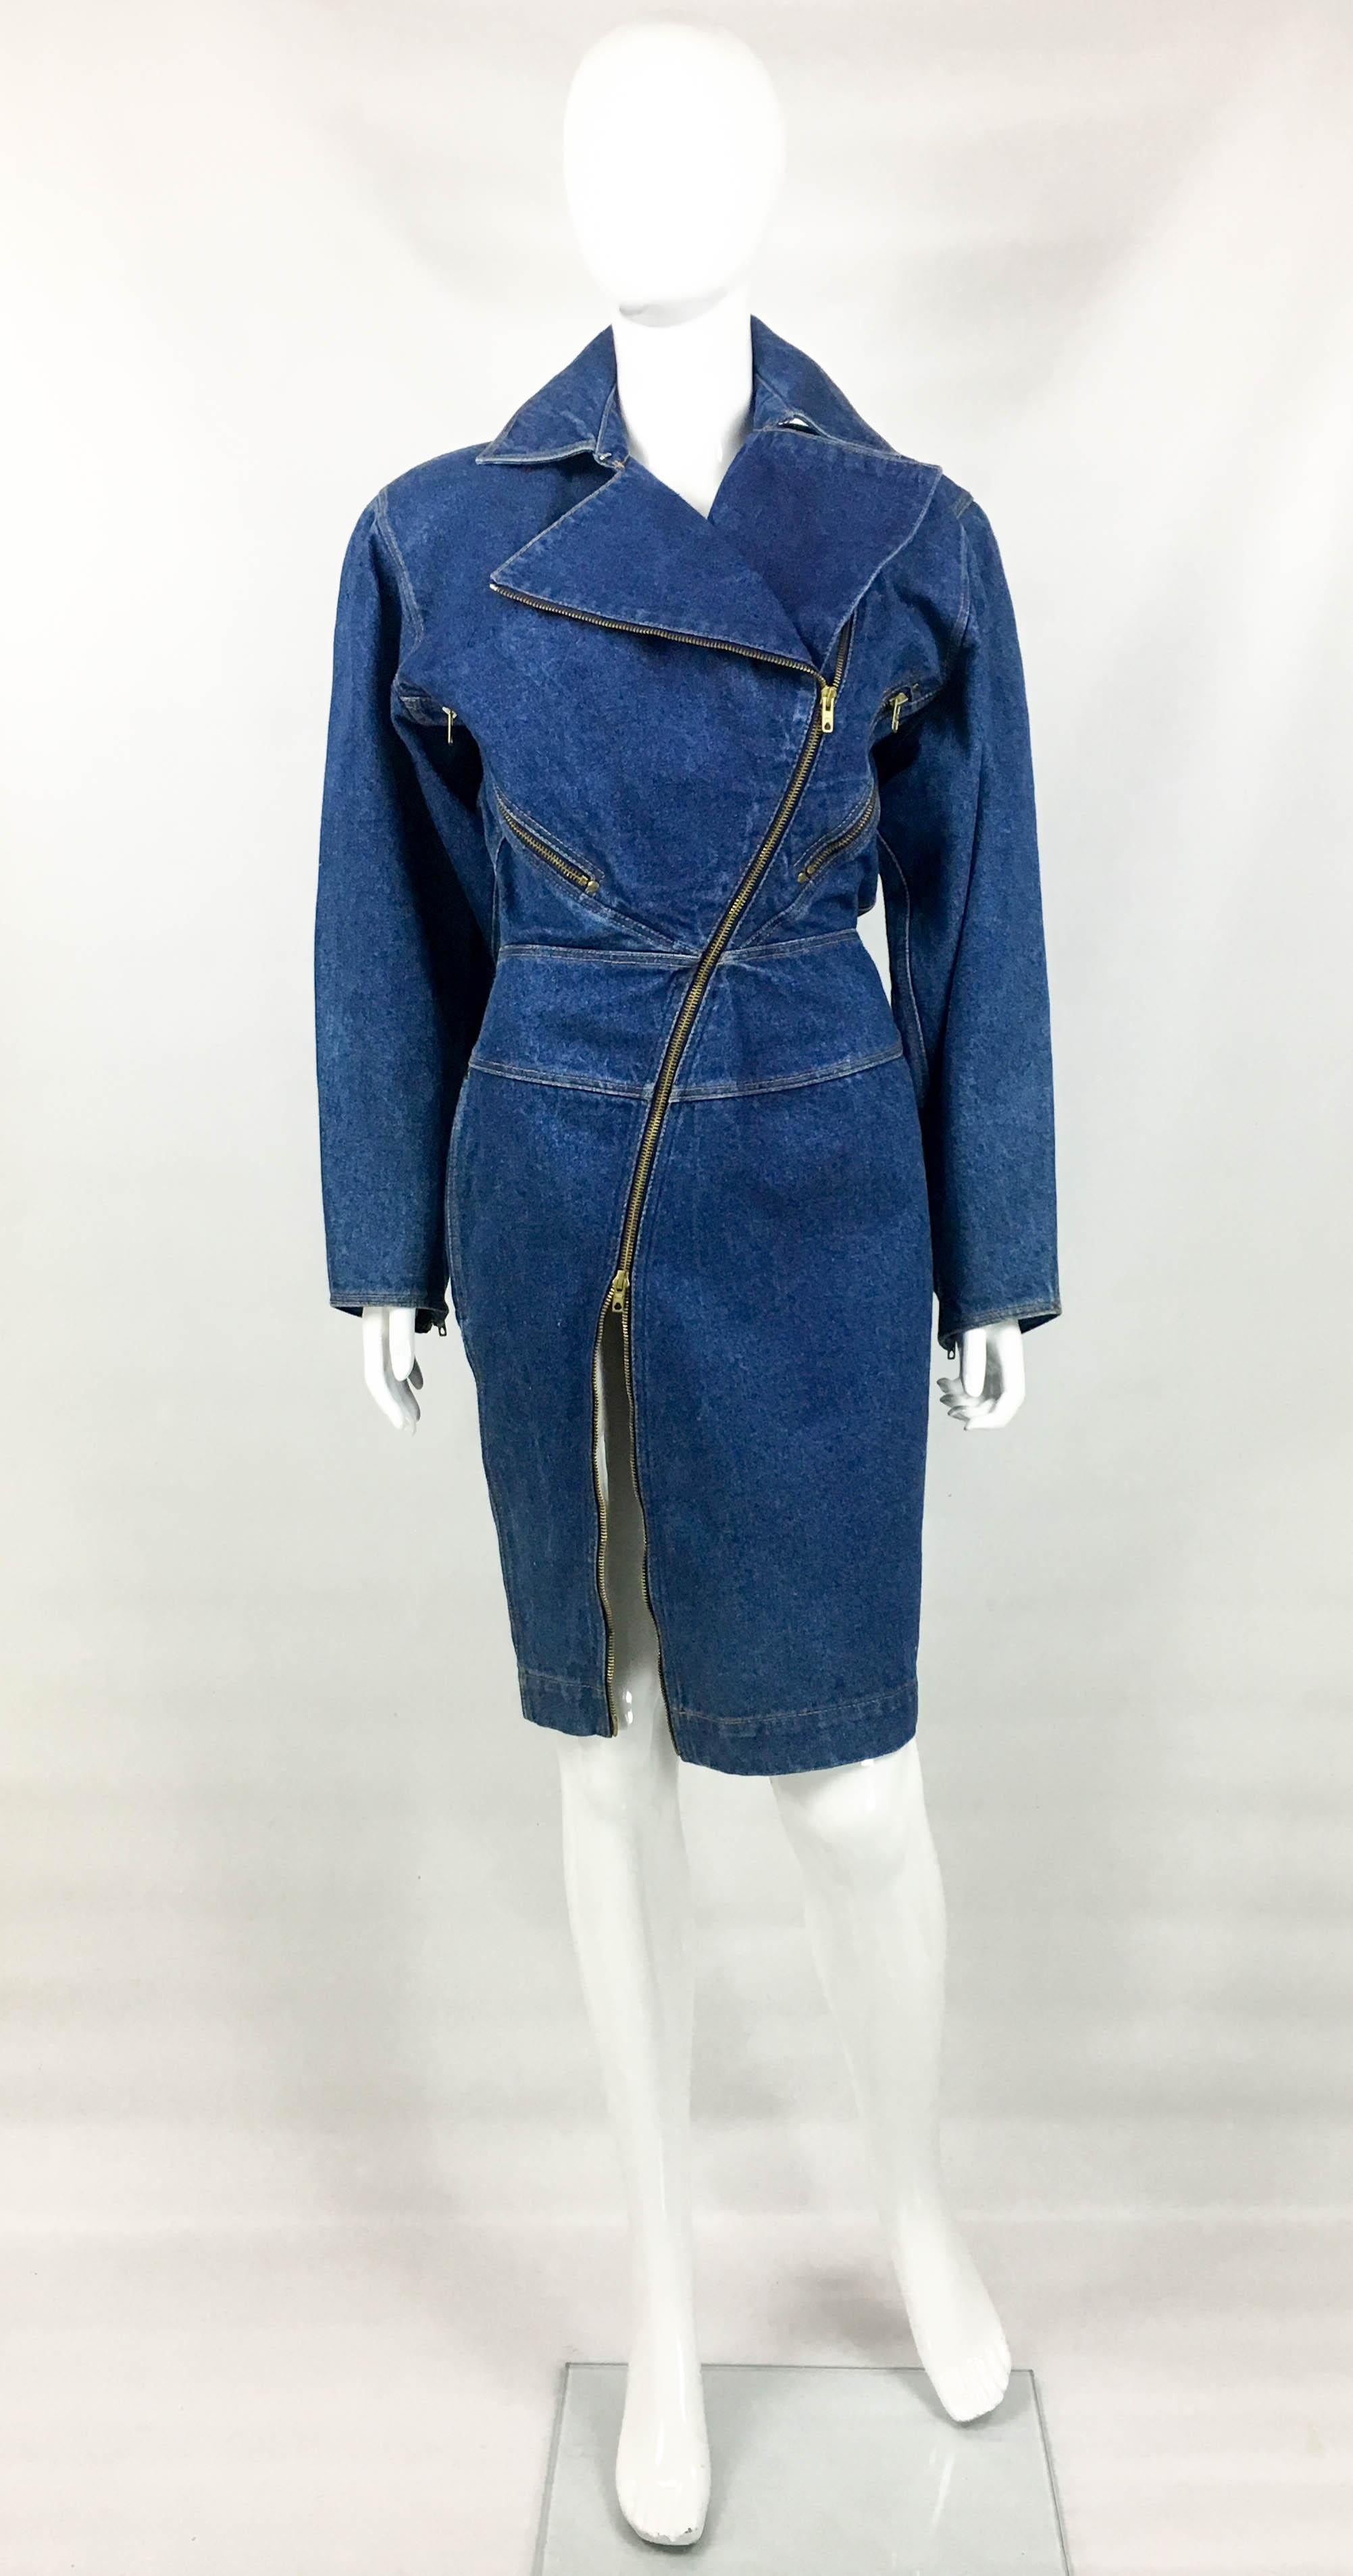 Vintage Azzedine Alaia Denim Motorcycle Zipper Dress. This striking piece by Azzedine Alaia was crafted for the 1985 Autumn / Winter Collection. A similar dress was photographed by Arthur Elgort for Vogue, February 1986 (please refer to photos). In